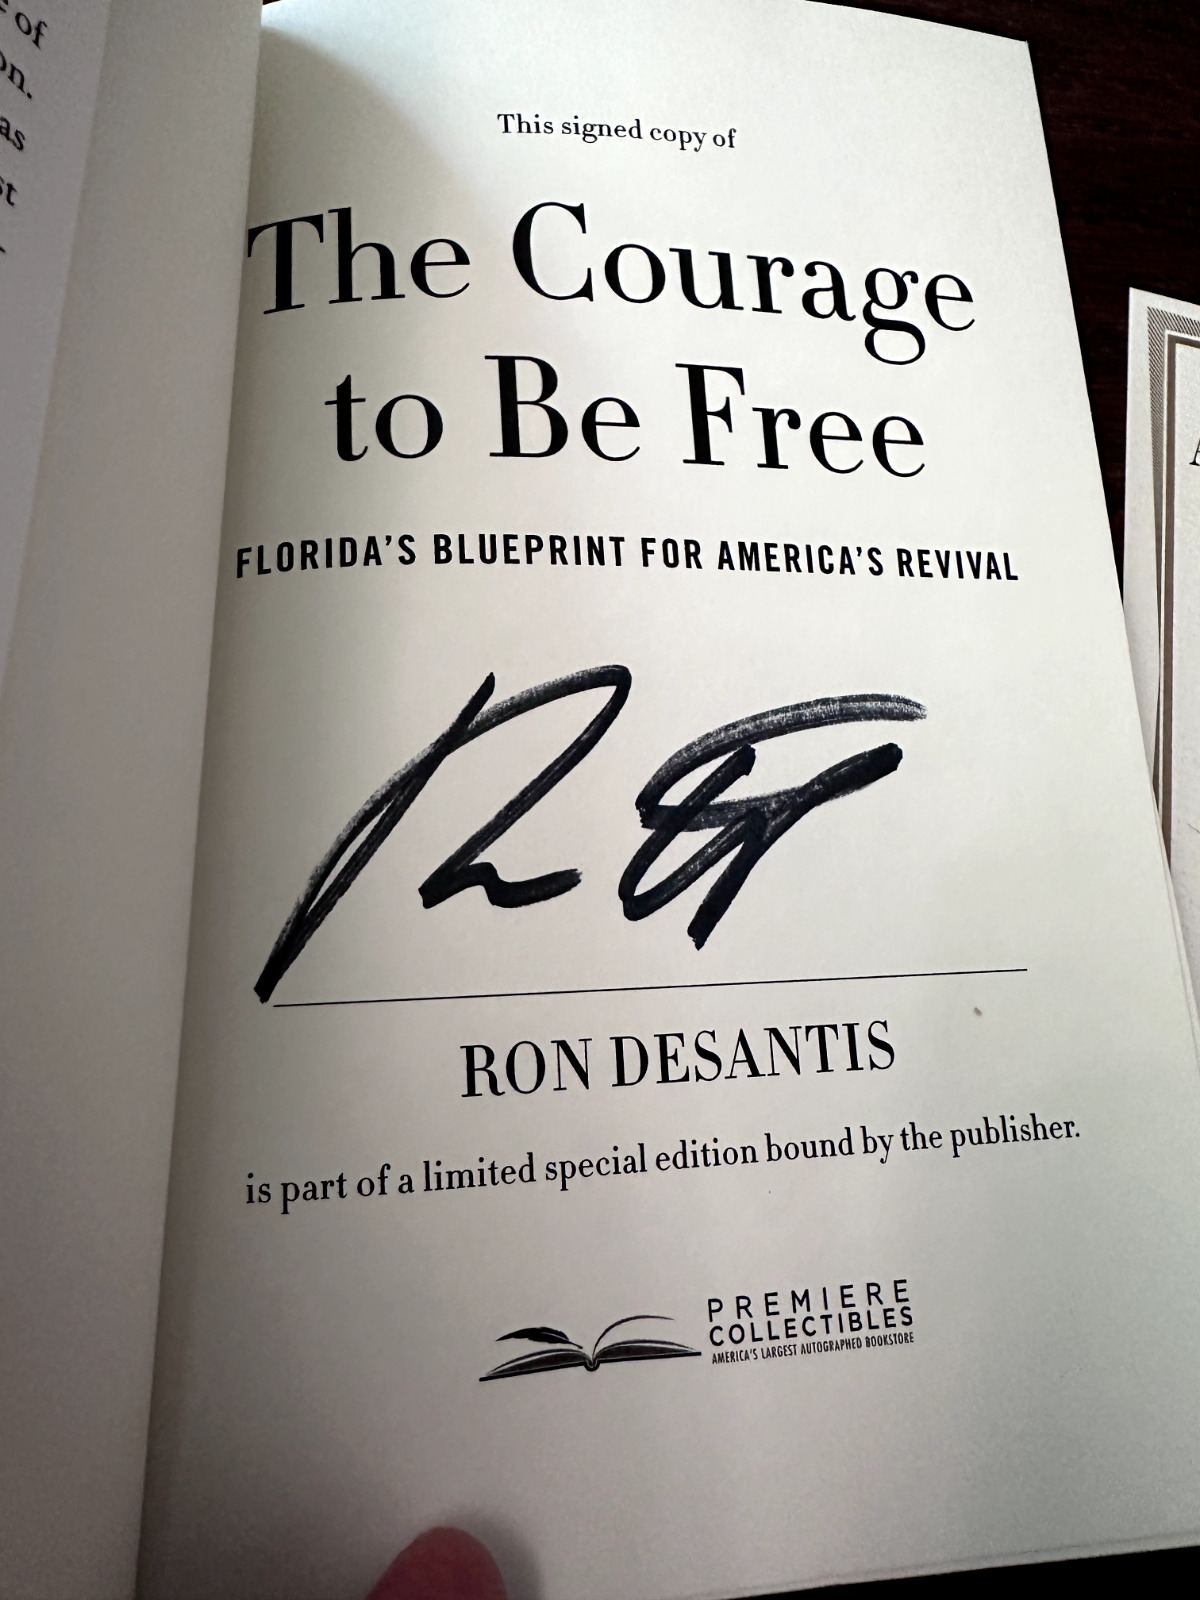 Florida Governor Ron DeSantis signed book The Courage to be Free